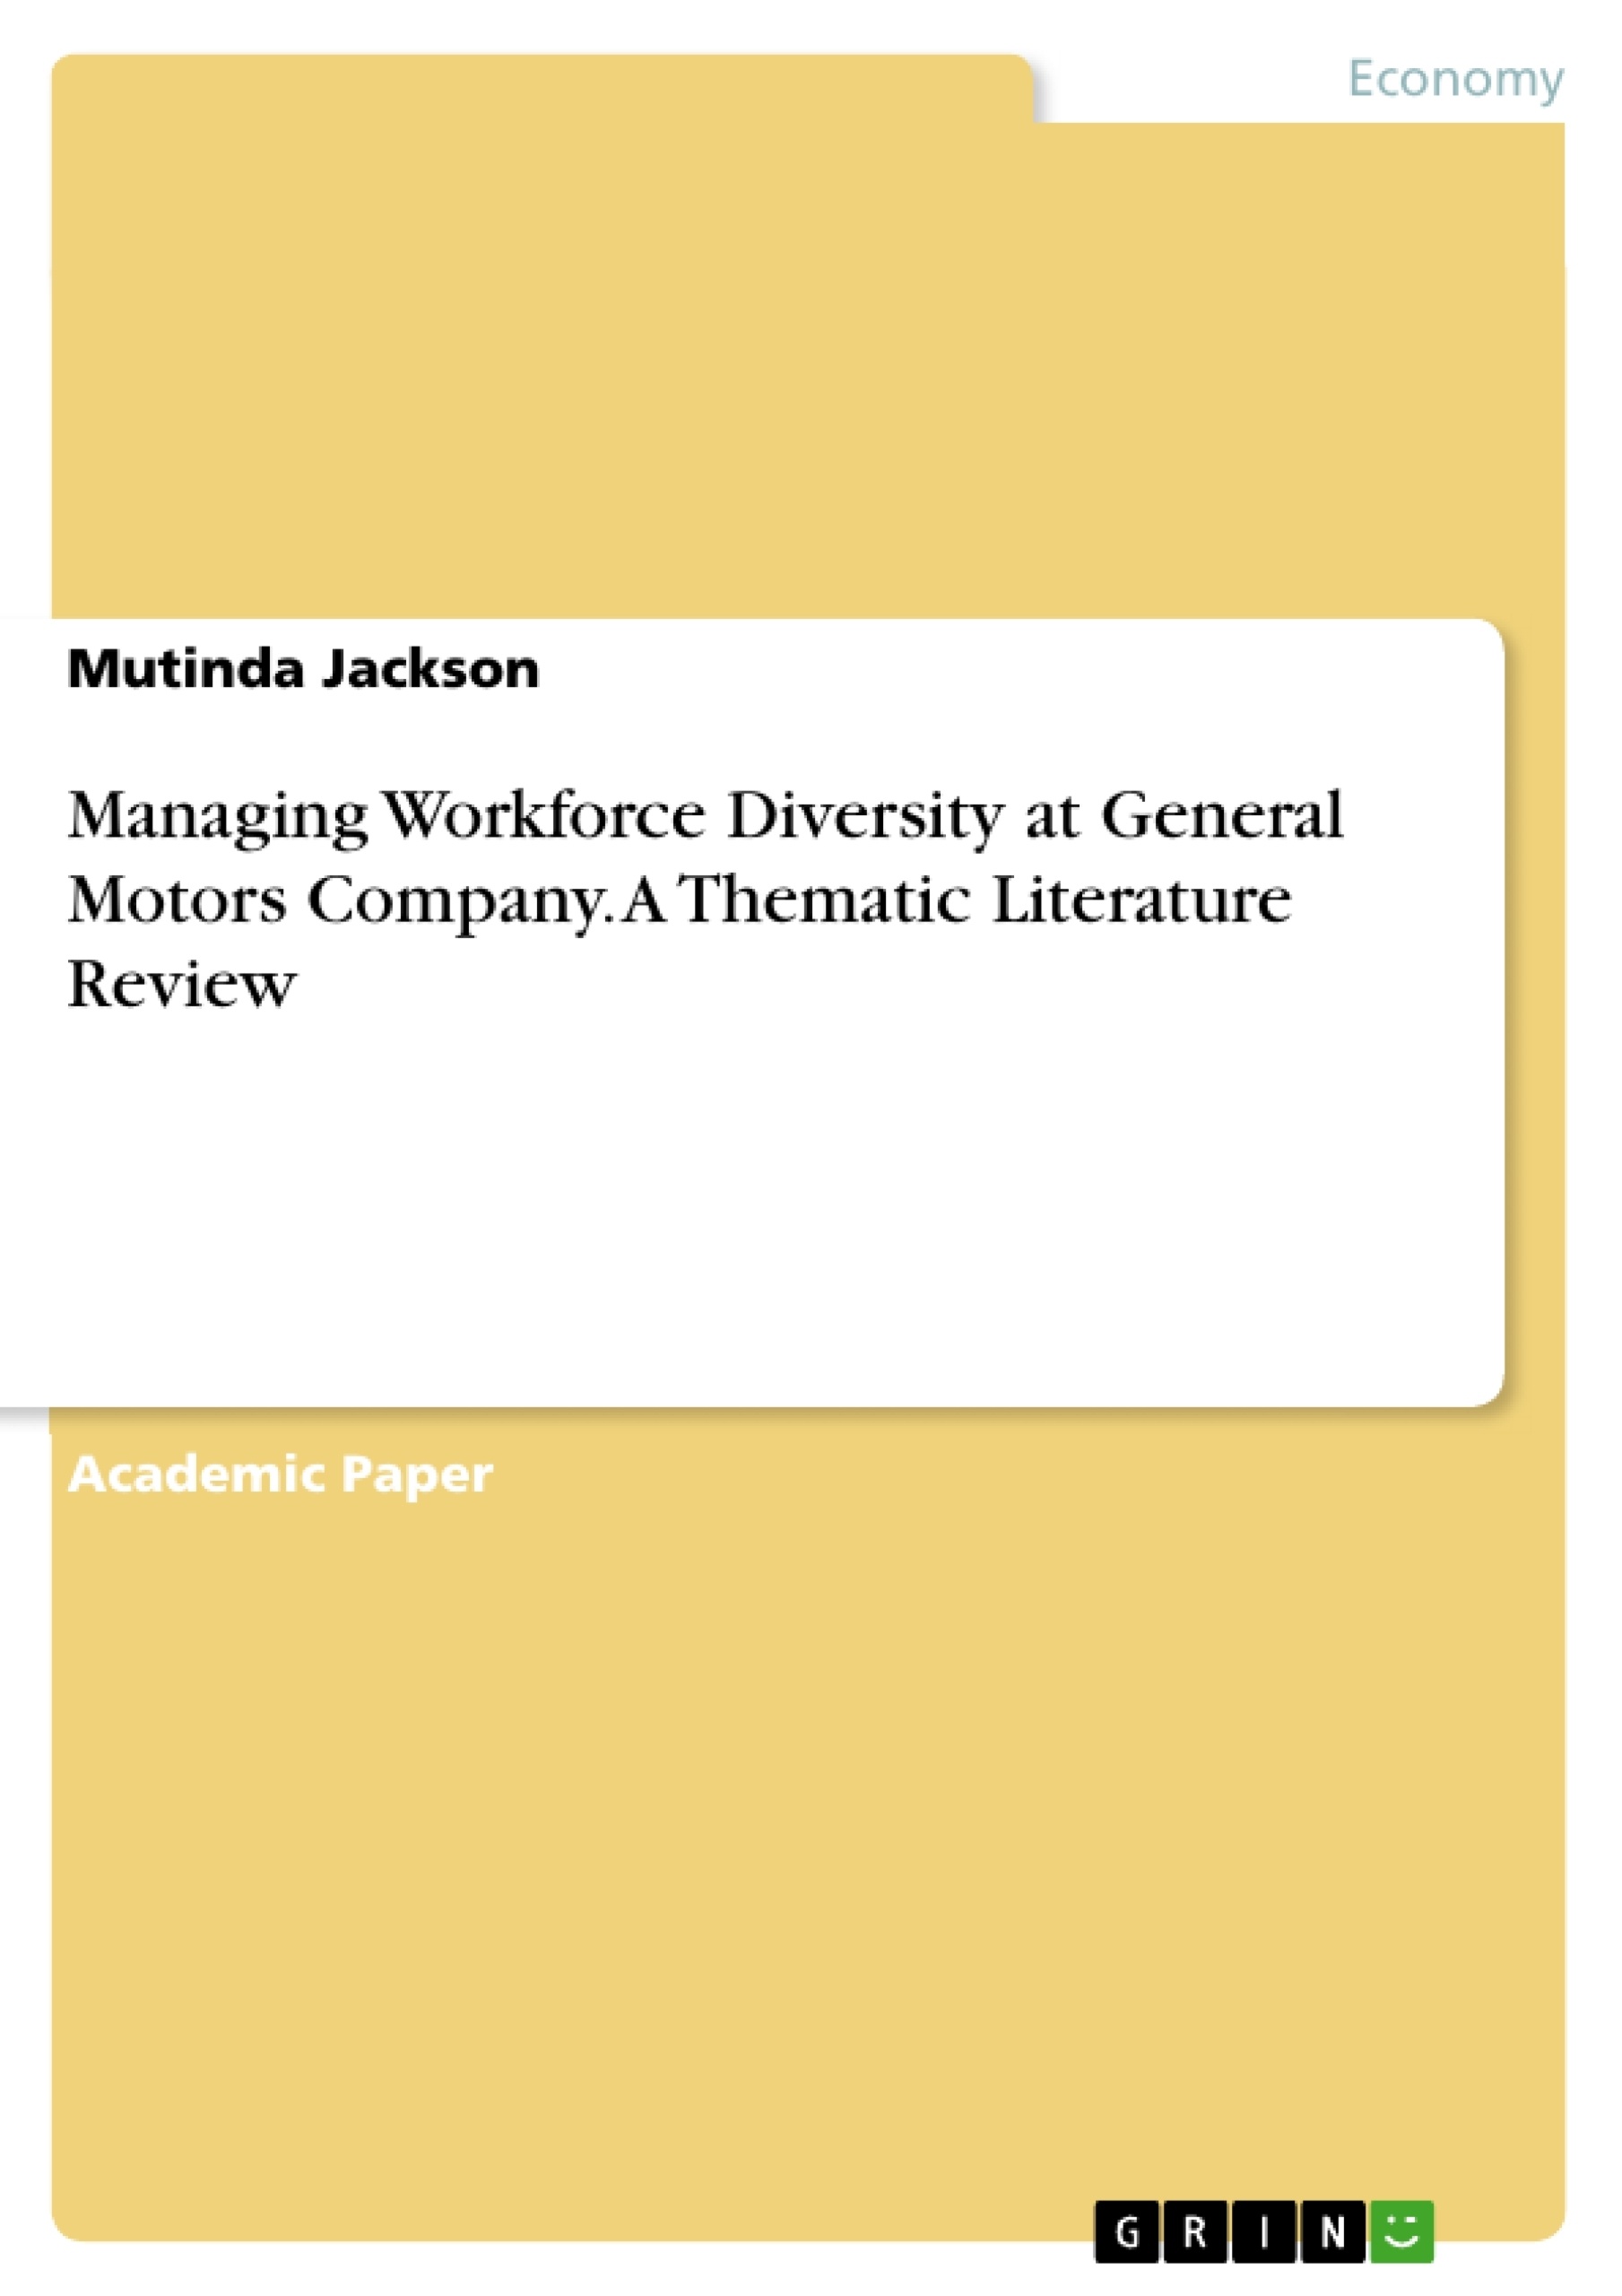 Title: Managing Workforce Diversity at General Motors Company. A Thematic Literature Review